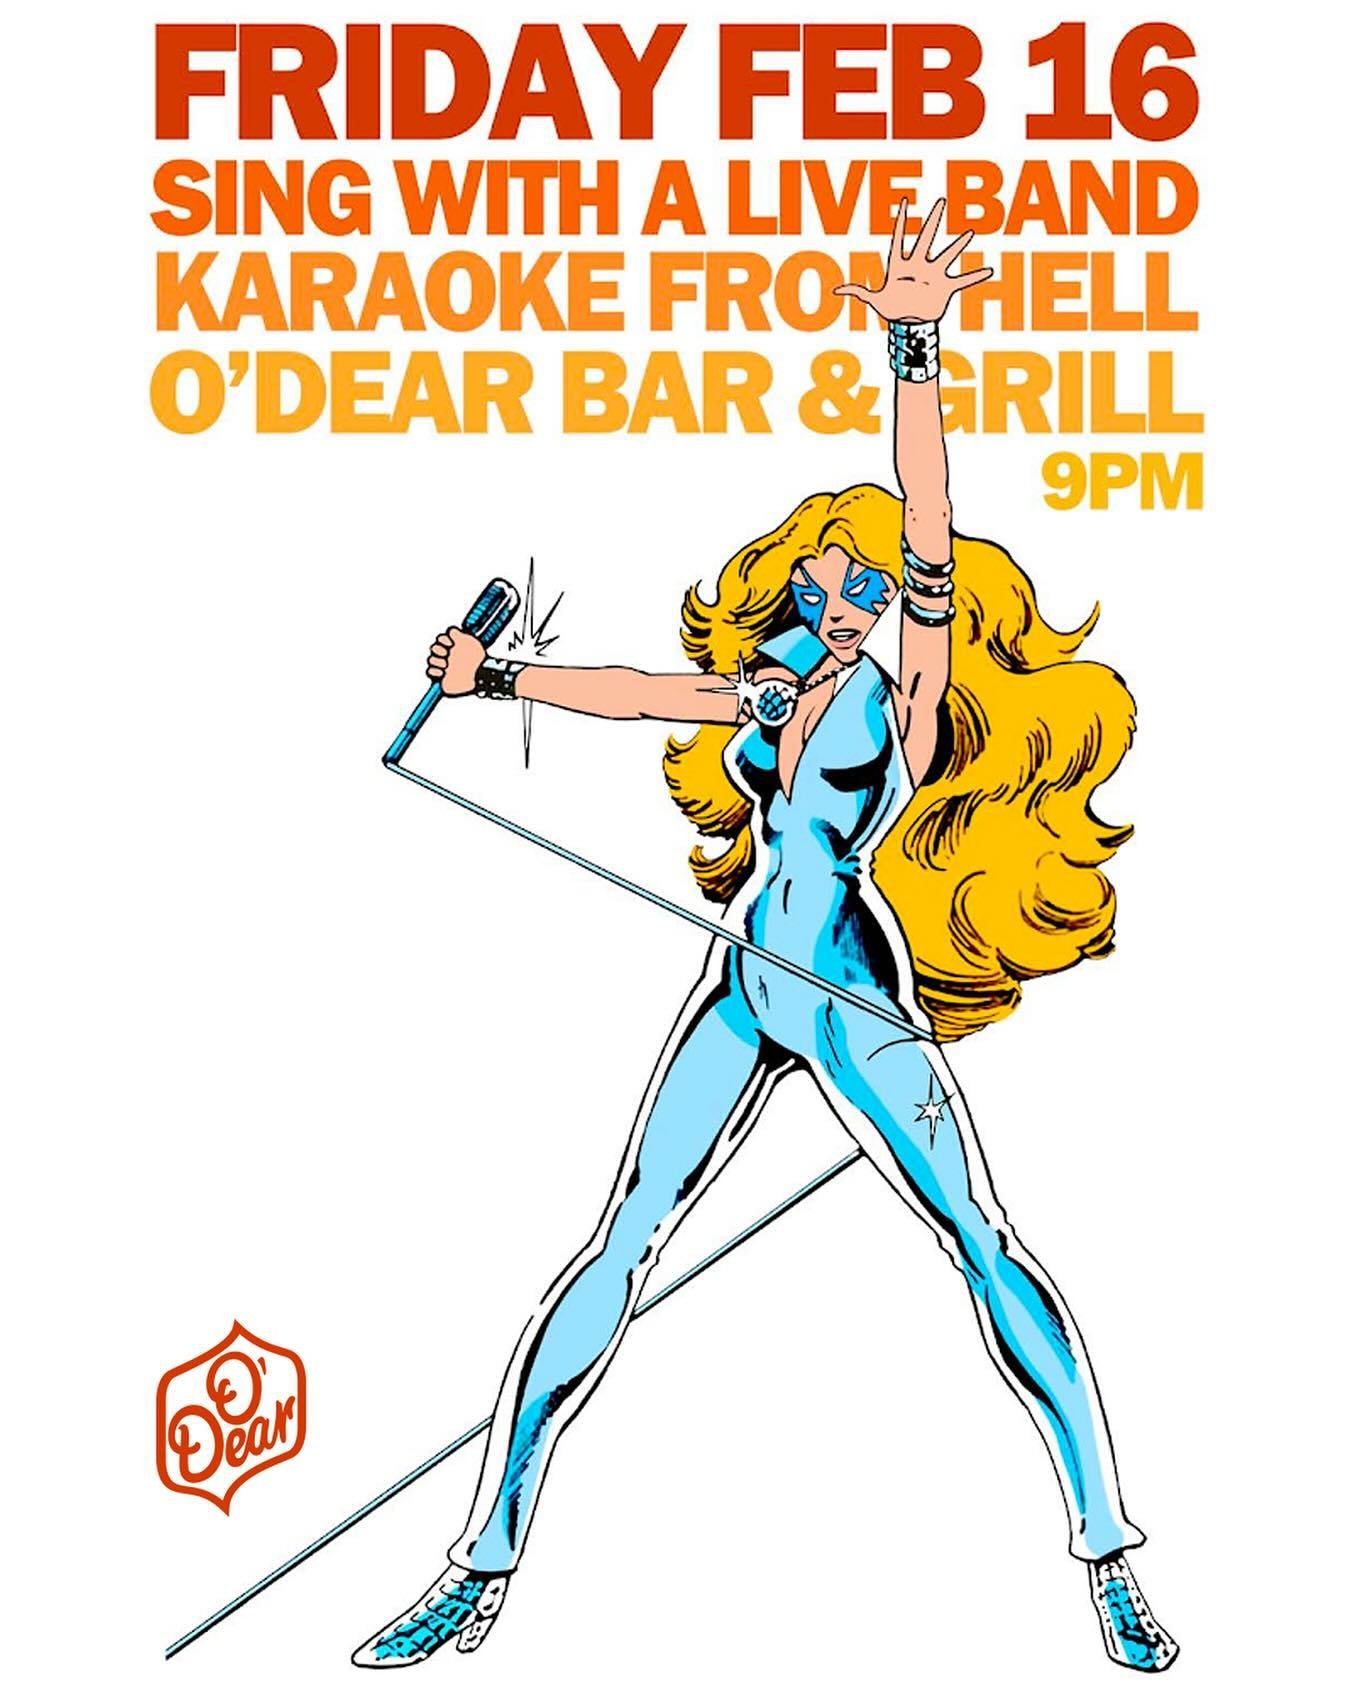 This Friday! It&rsquo;s like our normal karaoke, but from hell. If you&rsquo;ve ever wanted to sing with a live band this is your opportunity!

#odearbar #odearbarportland #karaoke #karaokepdx #karaokefromhell